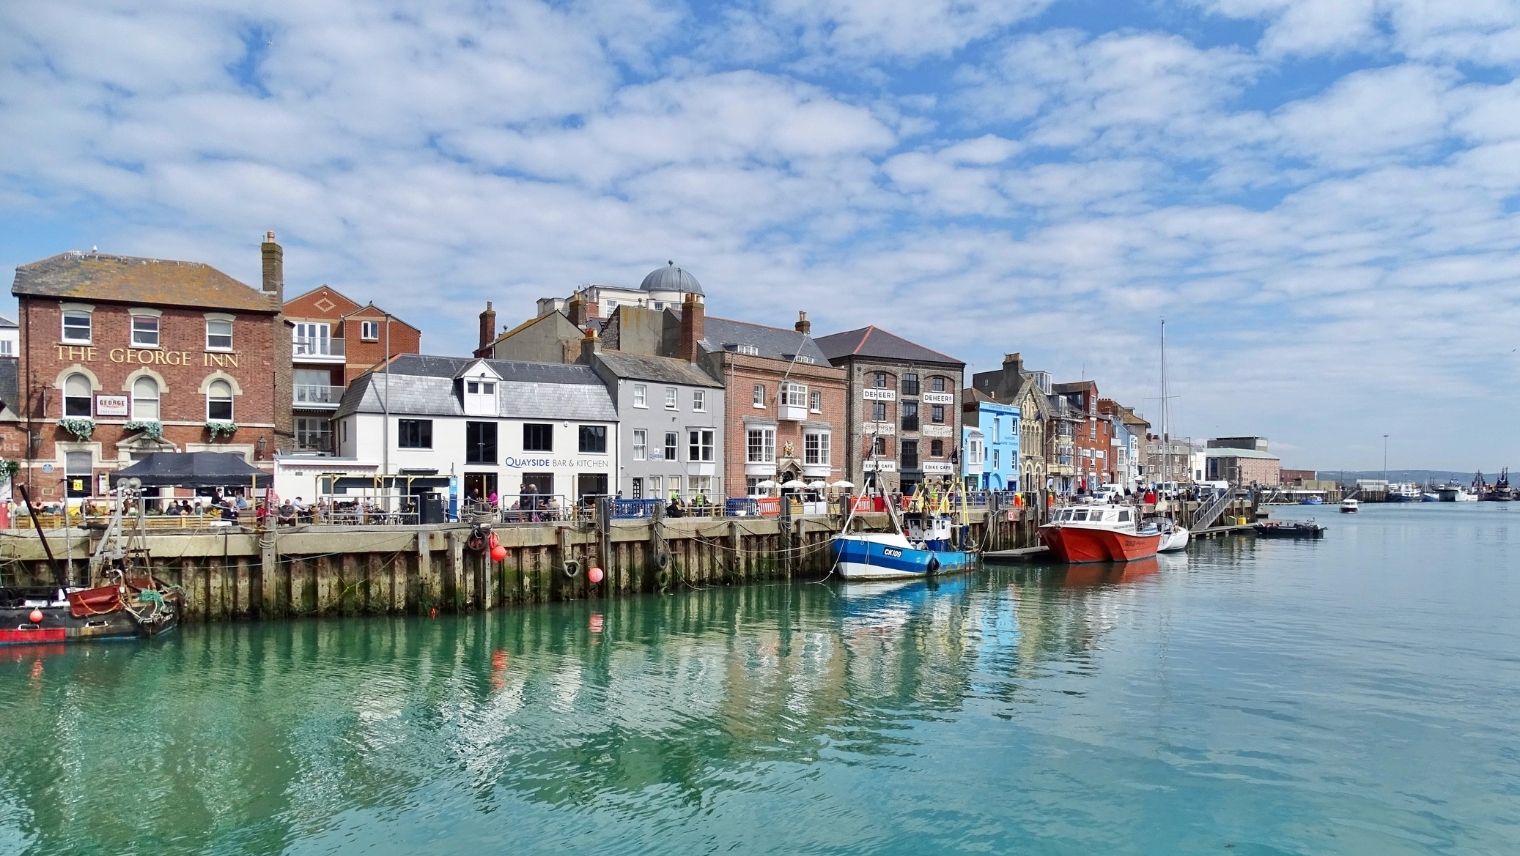 Weymouth harbour - a classic seaside town and port in Dorset